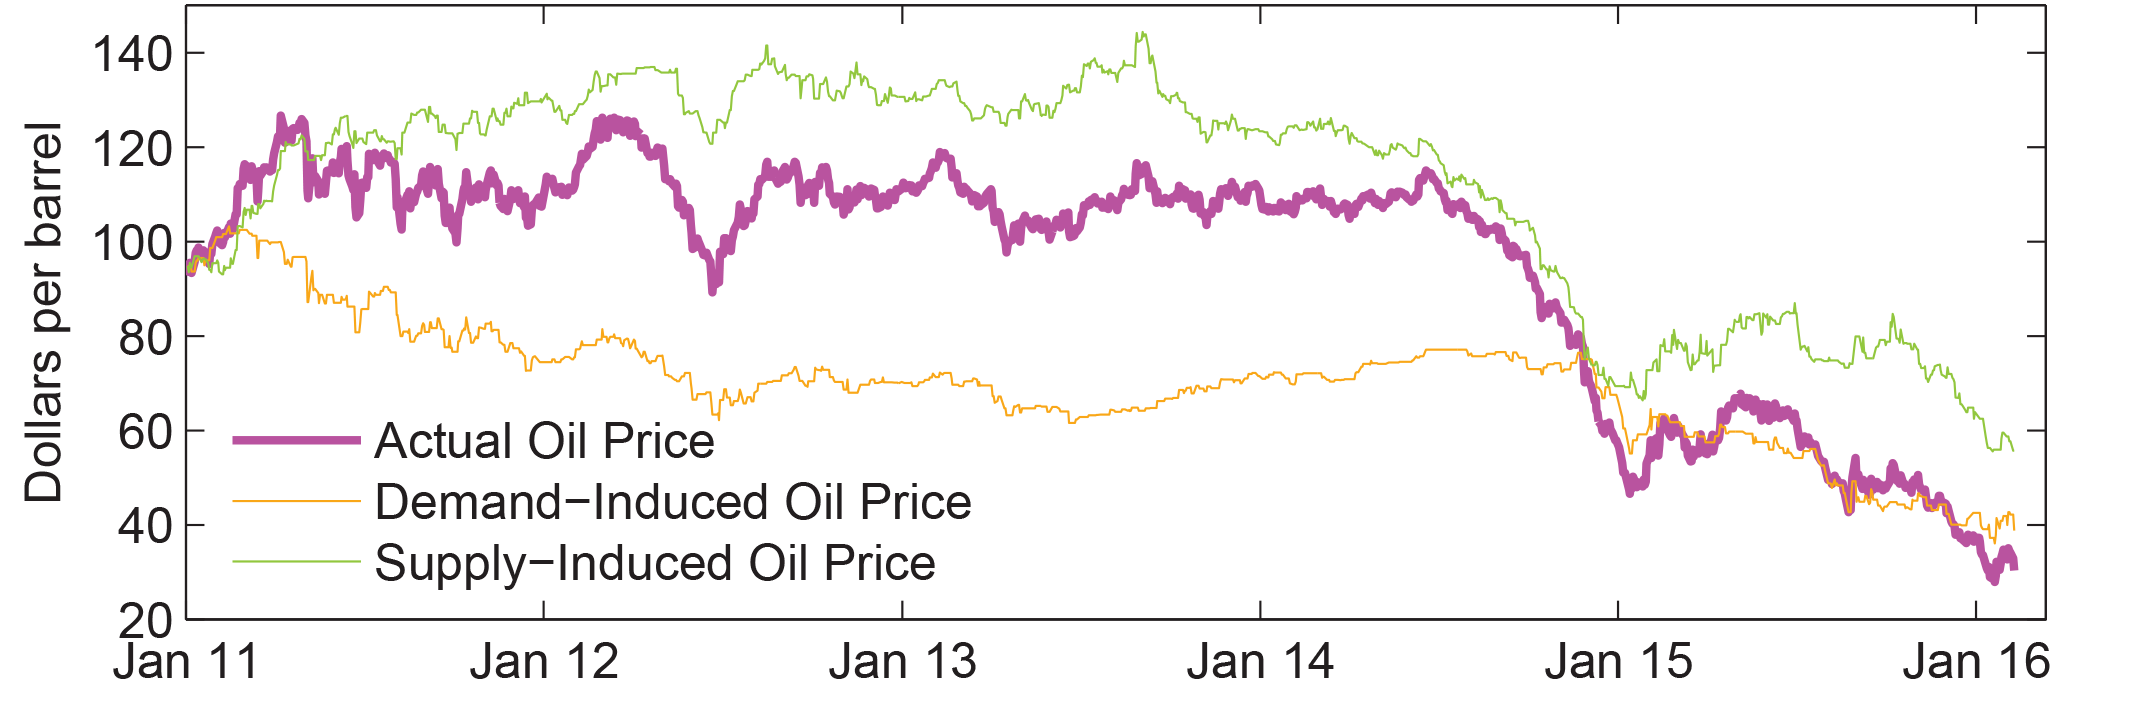 Figure 2: Demand-Induced and Supply-Induced  Oil Price Changes Since January 2011. See accessible link for data.